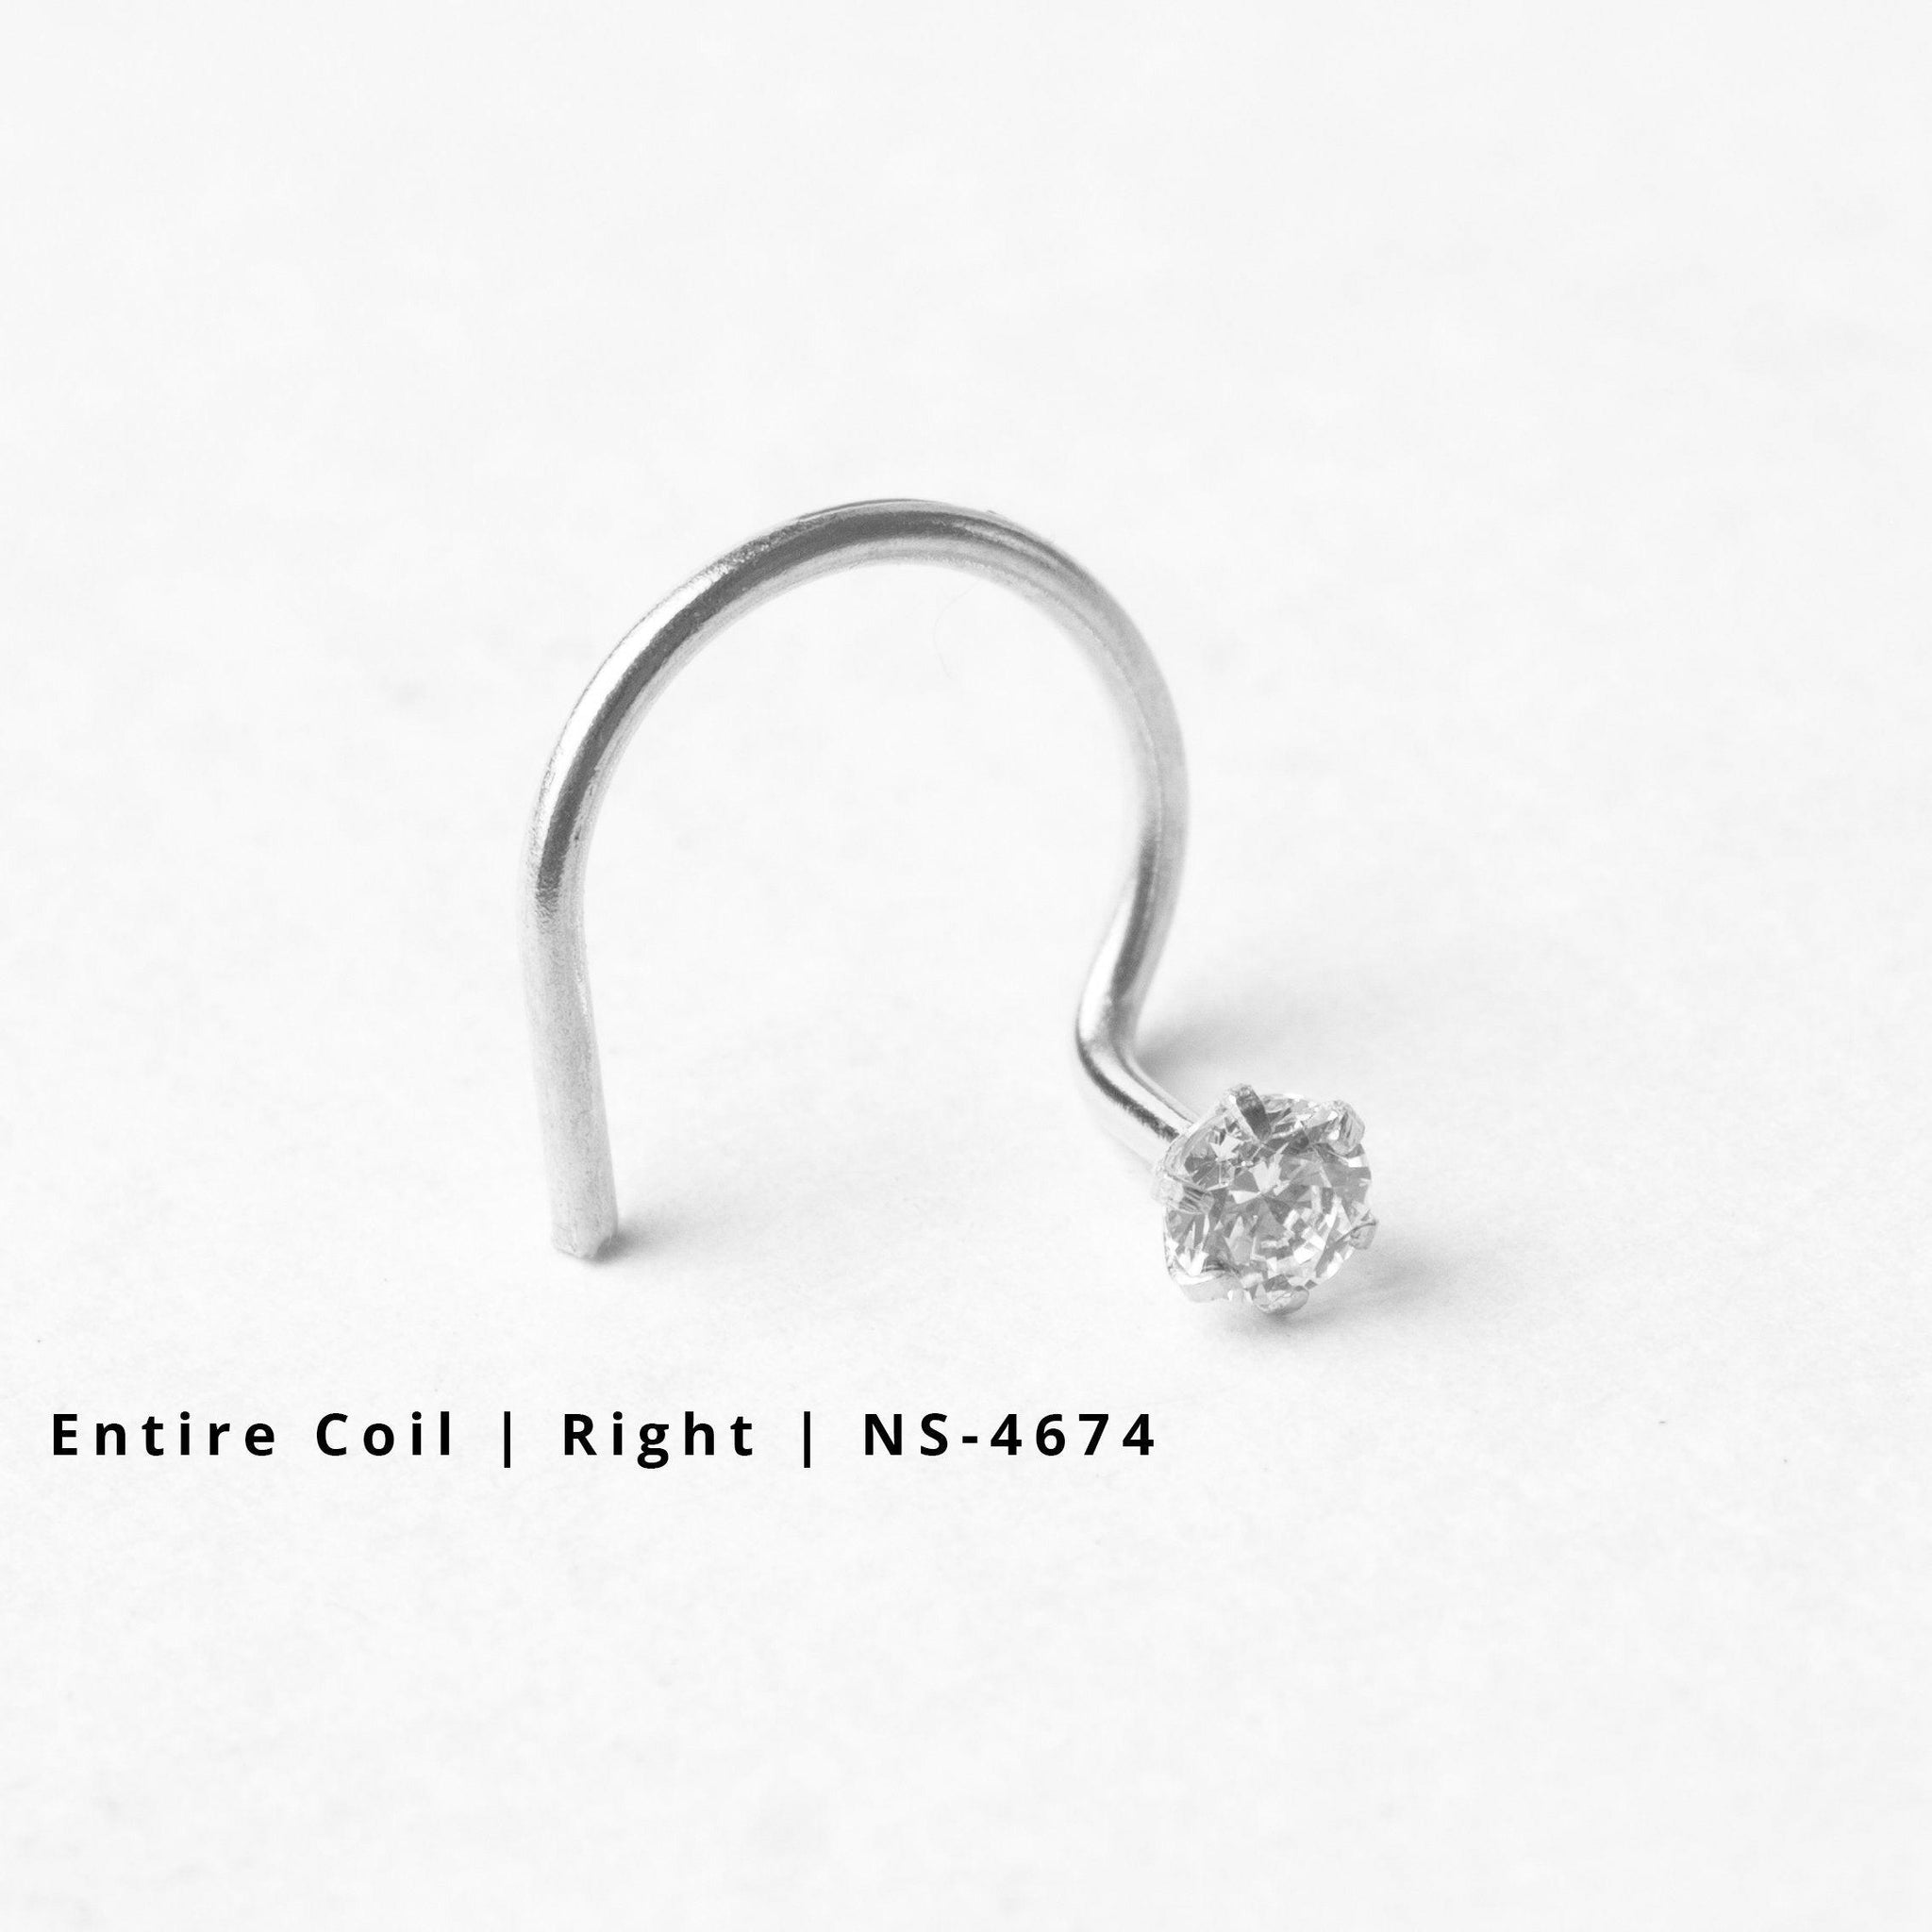 18ct Gold Nose Stud wire coil back with a Cubic Zirconia Stone (2mm - 4.5mm)